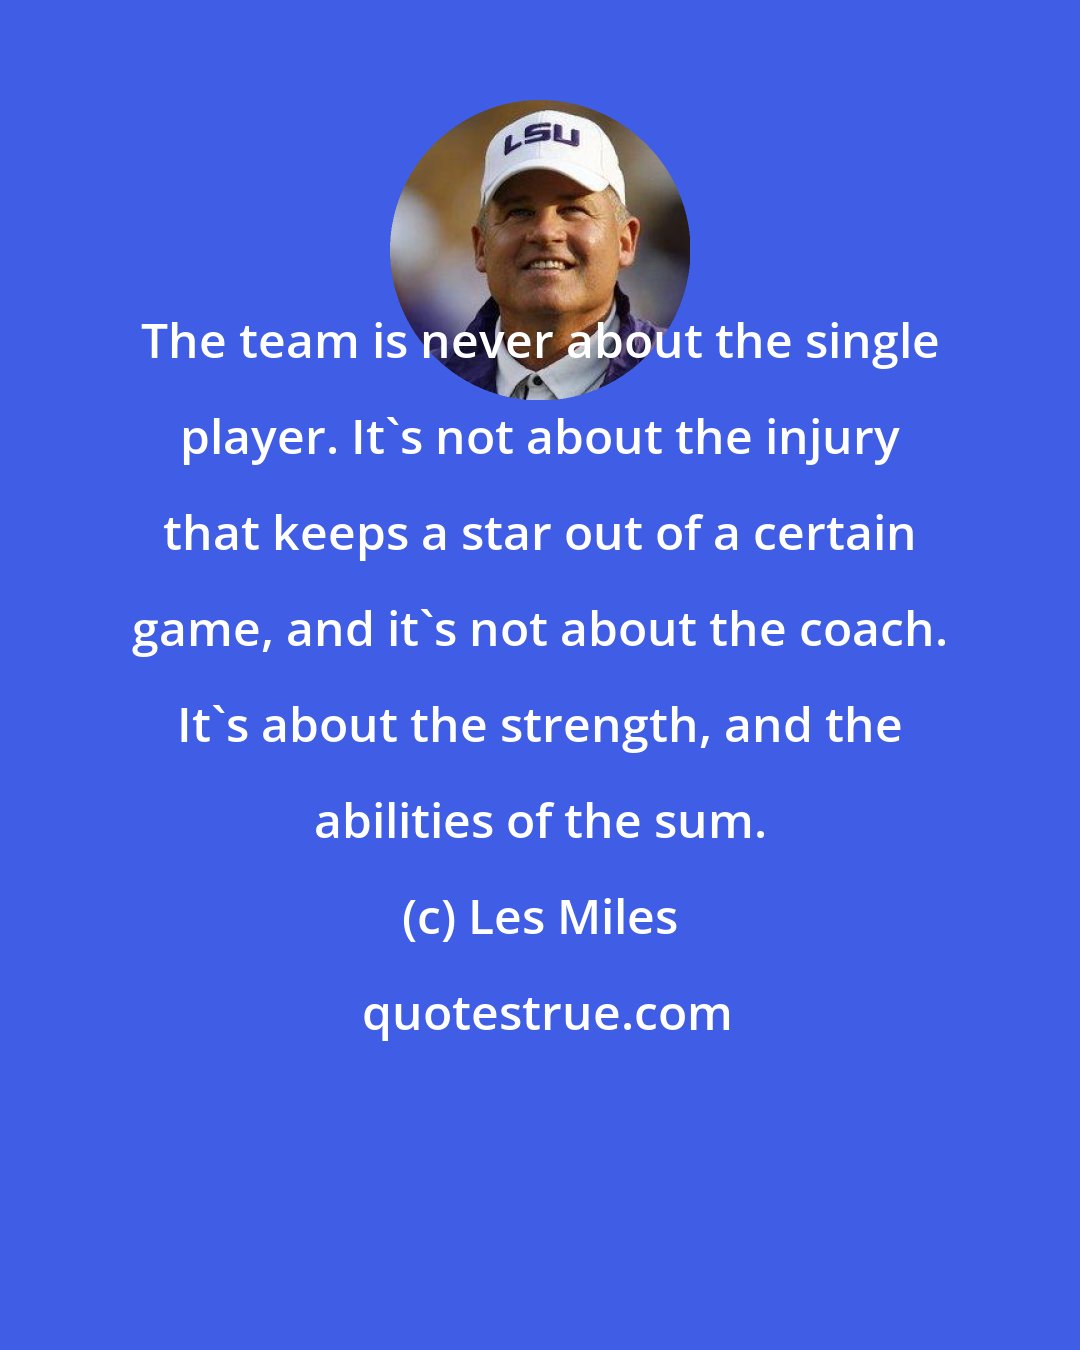 Les Miles: The team is never about the single player. It's not about the injury that keeps a star out of a certain game, and it's not about the coach. It's about the strength, and the abilities of the sum.